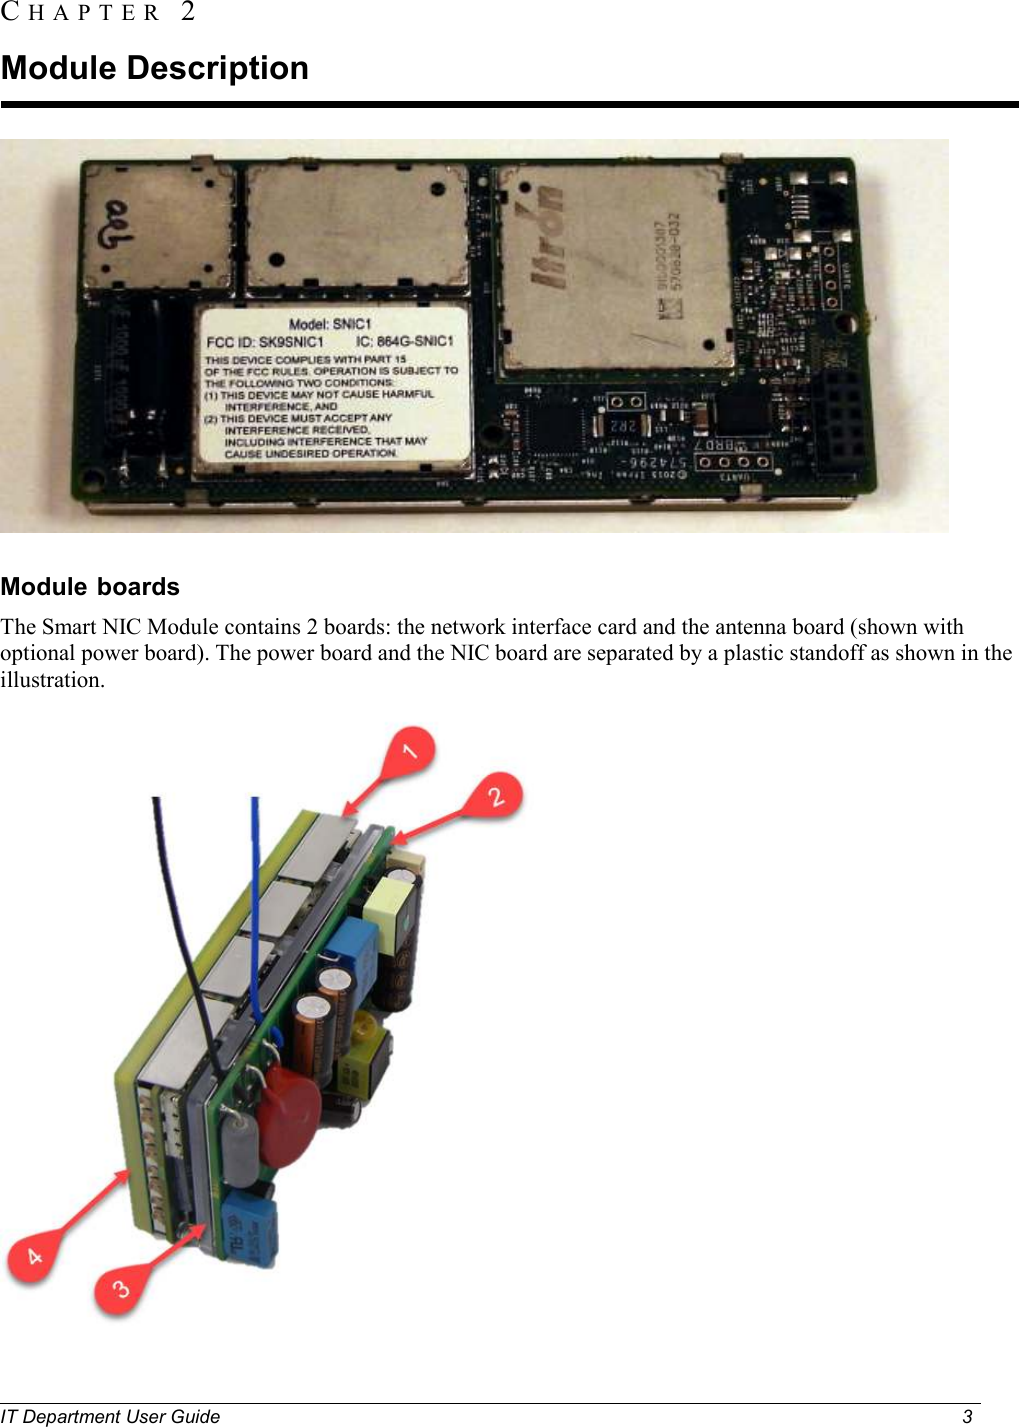  IT Department User Guide  3       Module boards The Smart NIC Module contains 2 boards: the network interface card and the antenna board (shown with optional power board). The power board and the NIC board are separated by a plastic standoff as shown in the illustration.  CH A P T E R  2  Module Description 